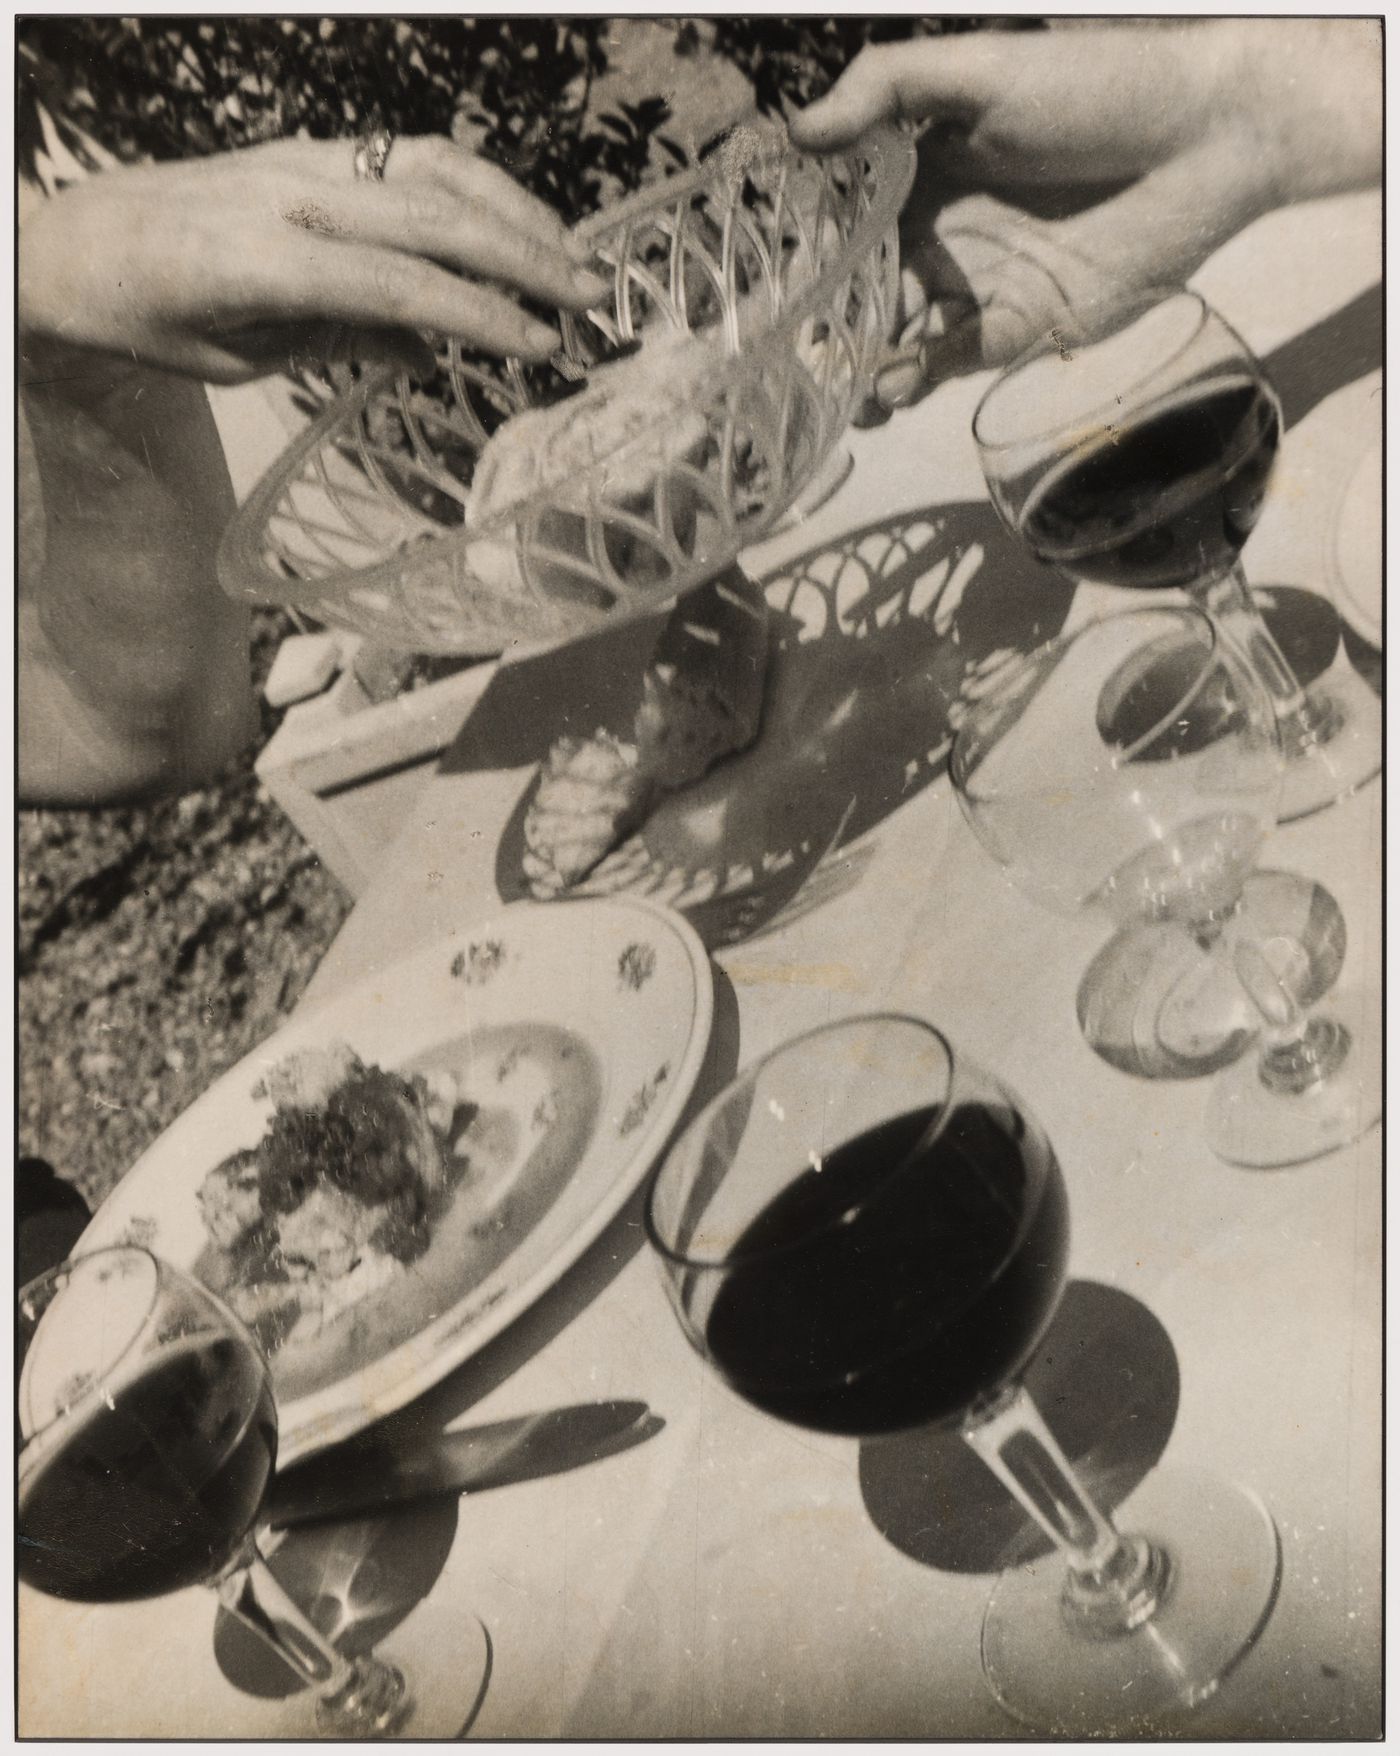 The hands of architects Arthur Erickson and Guy Desbarats during a meal in France [Pass the Bread, Please!]